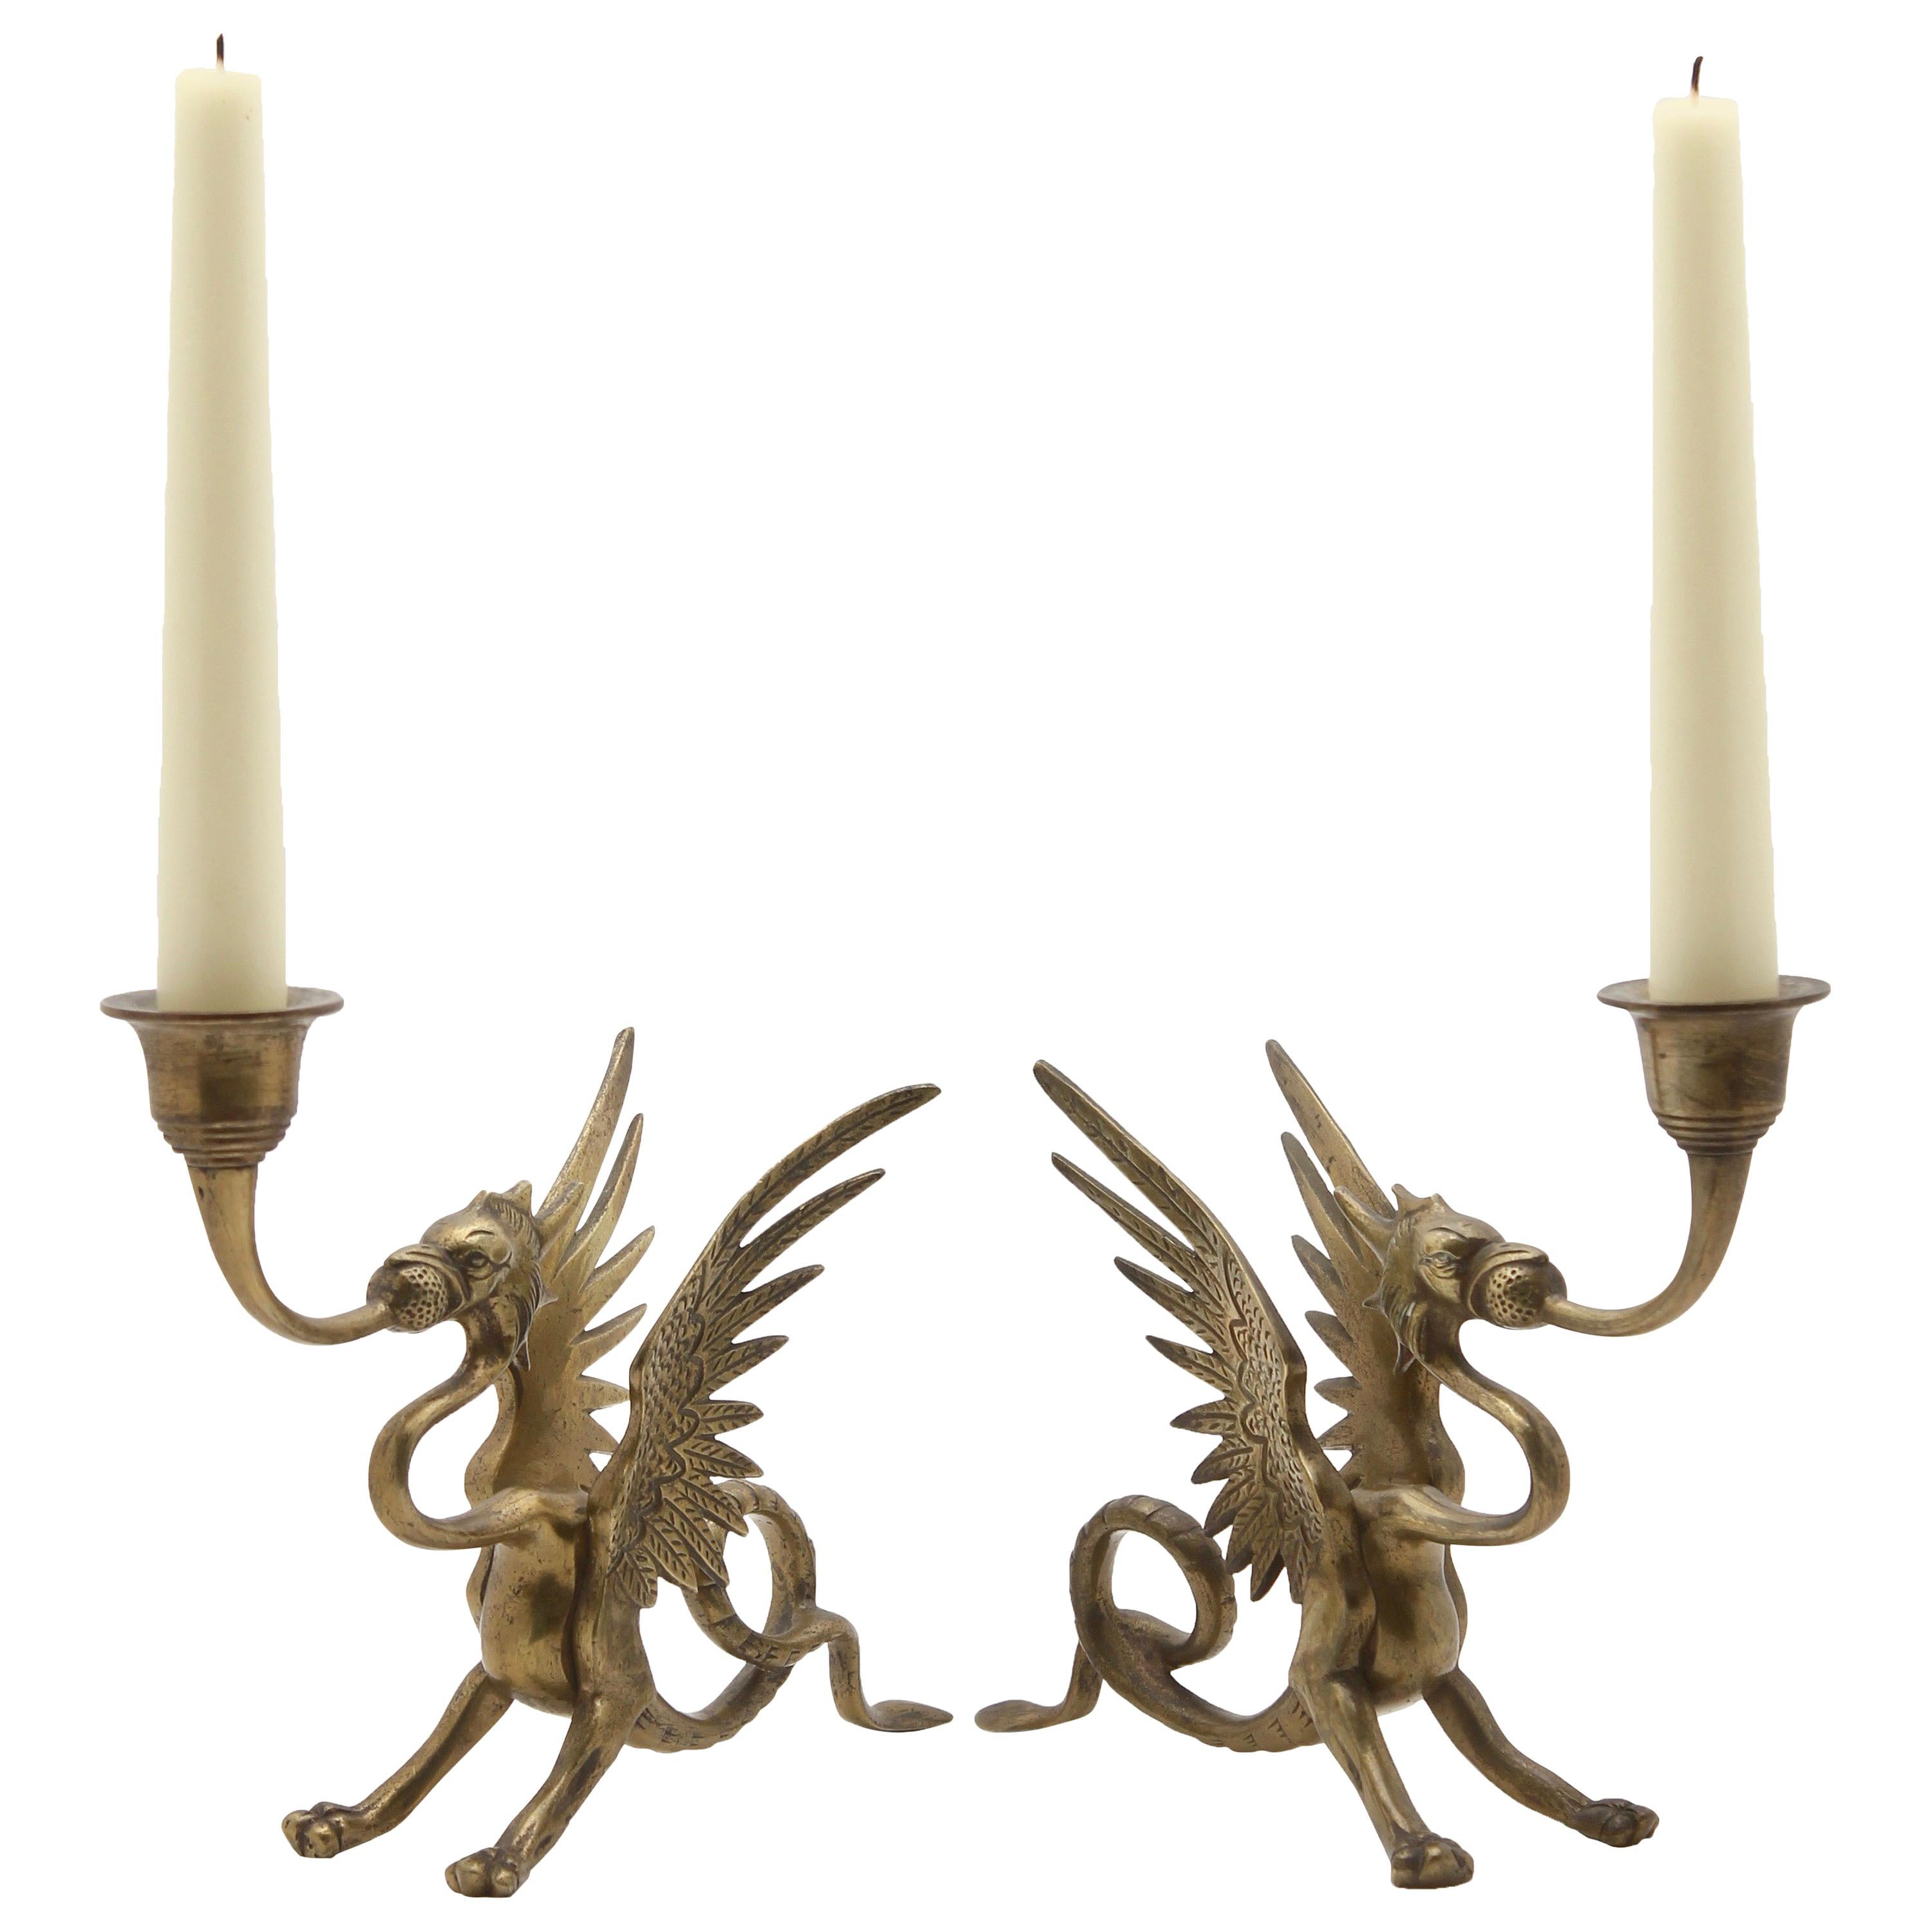 Two Brass Counterbalanced Candlesticks in the Shape of Dragons